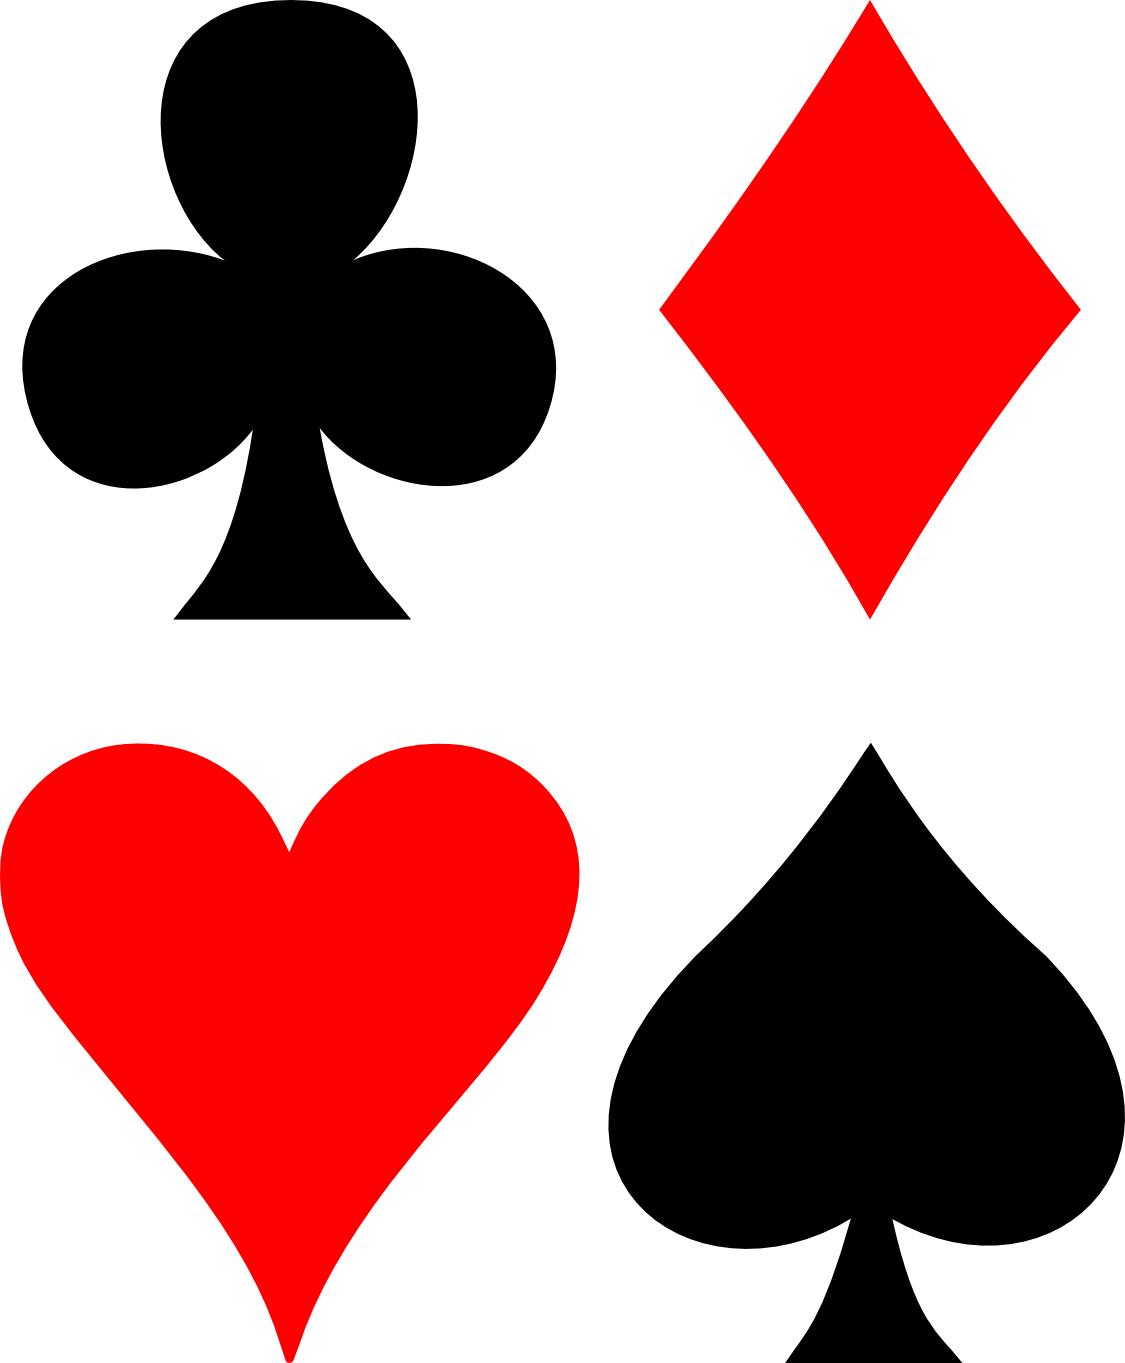 Clubs And Spades - ClipArt Best